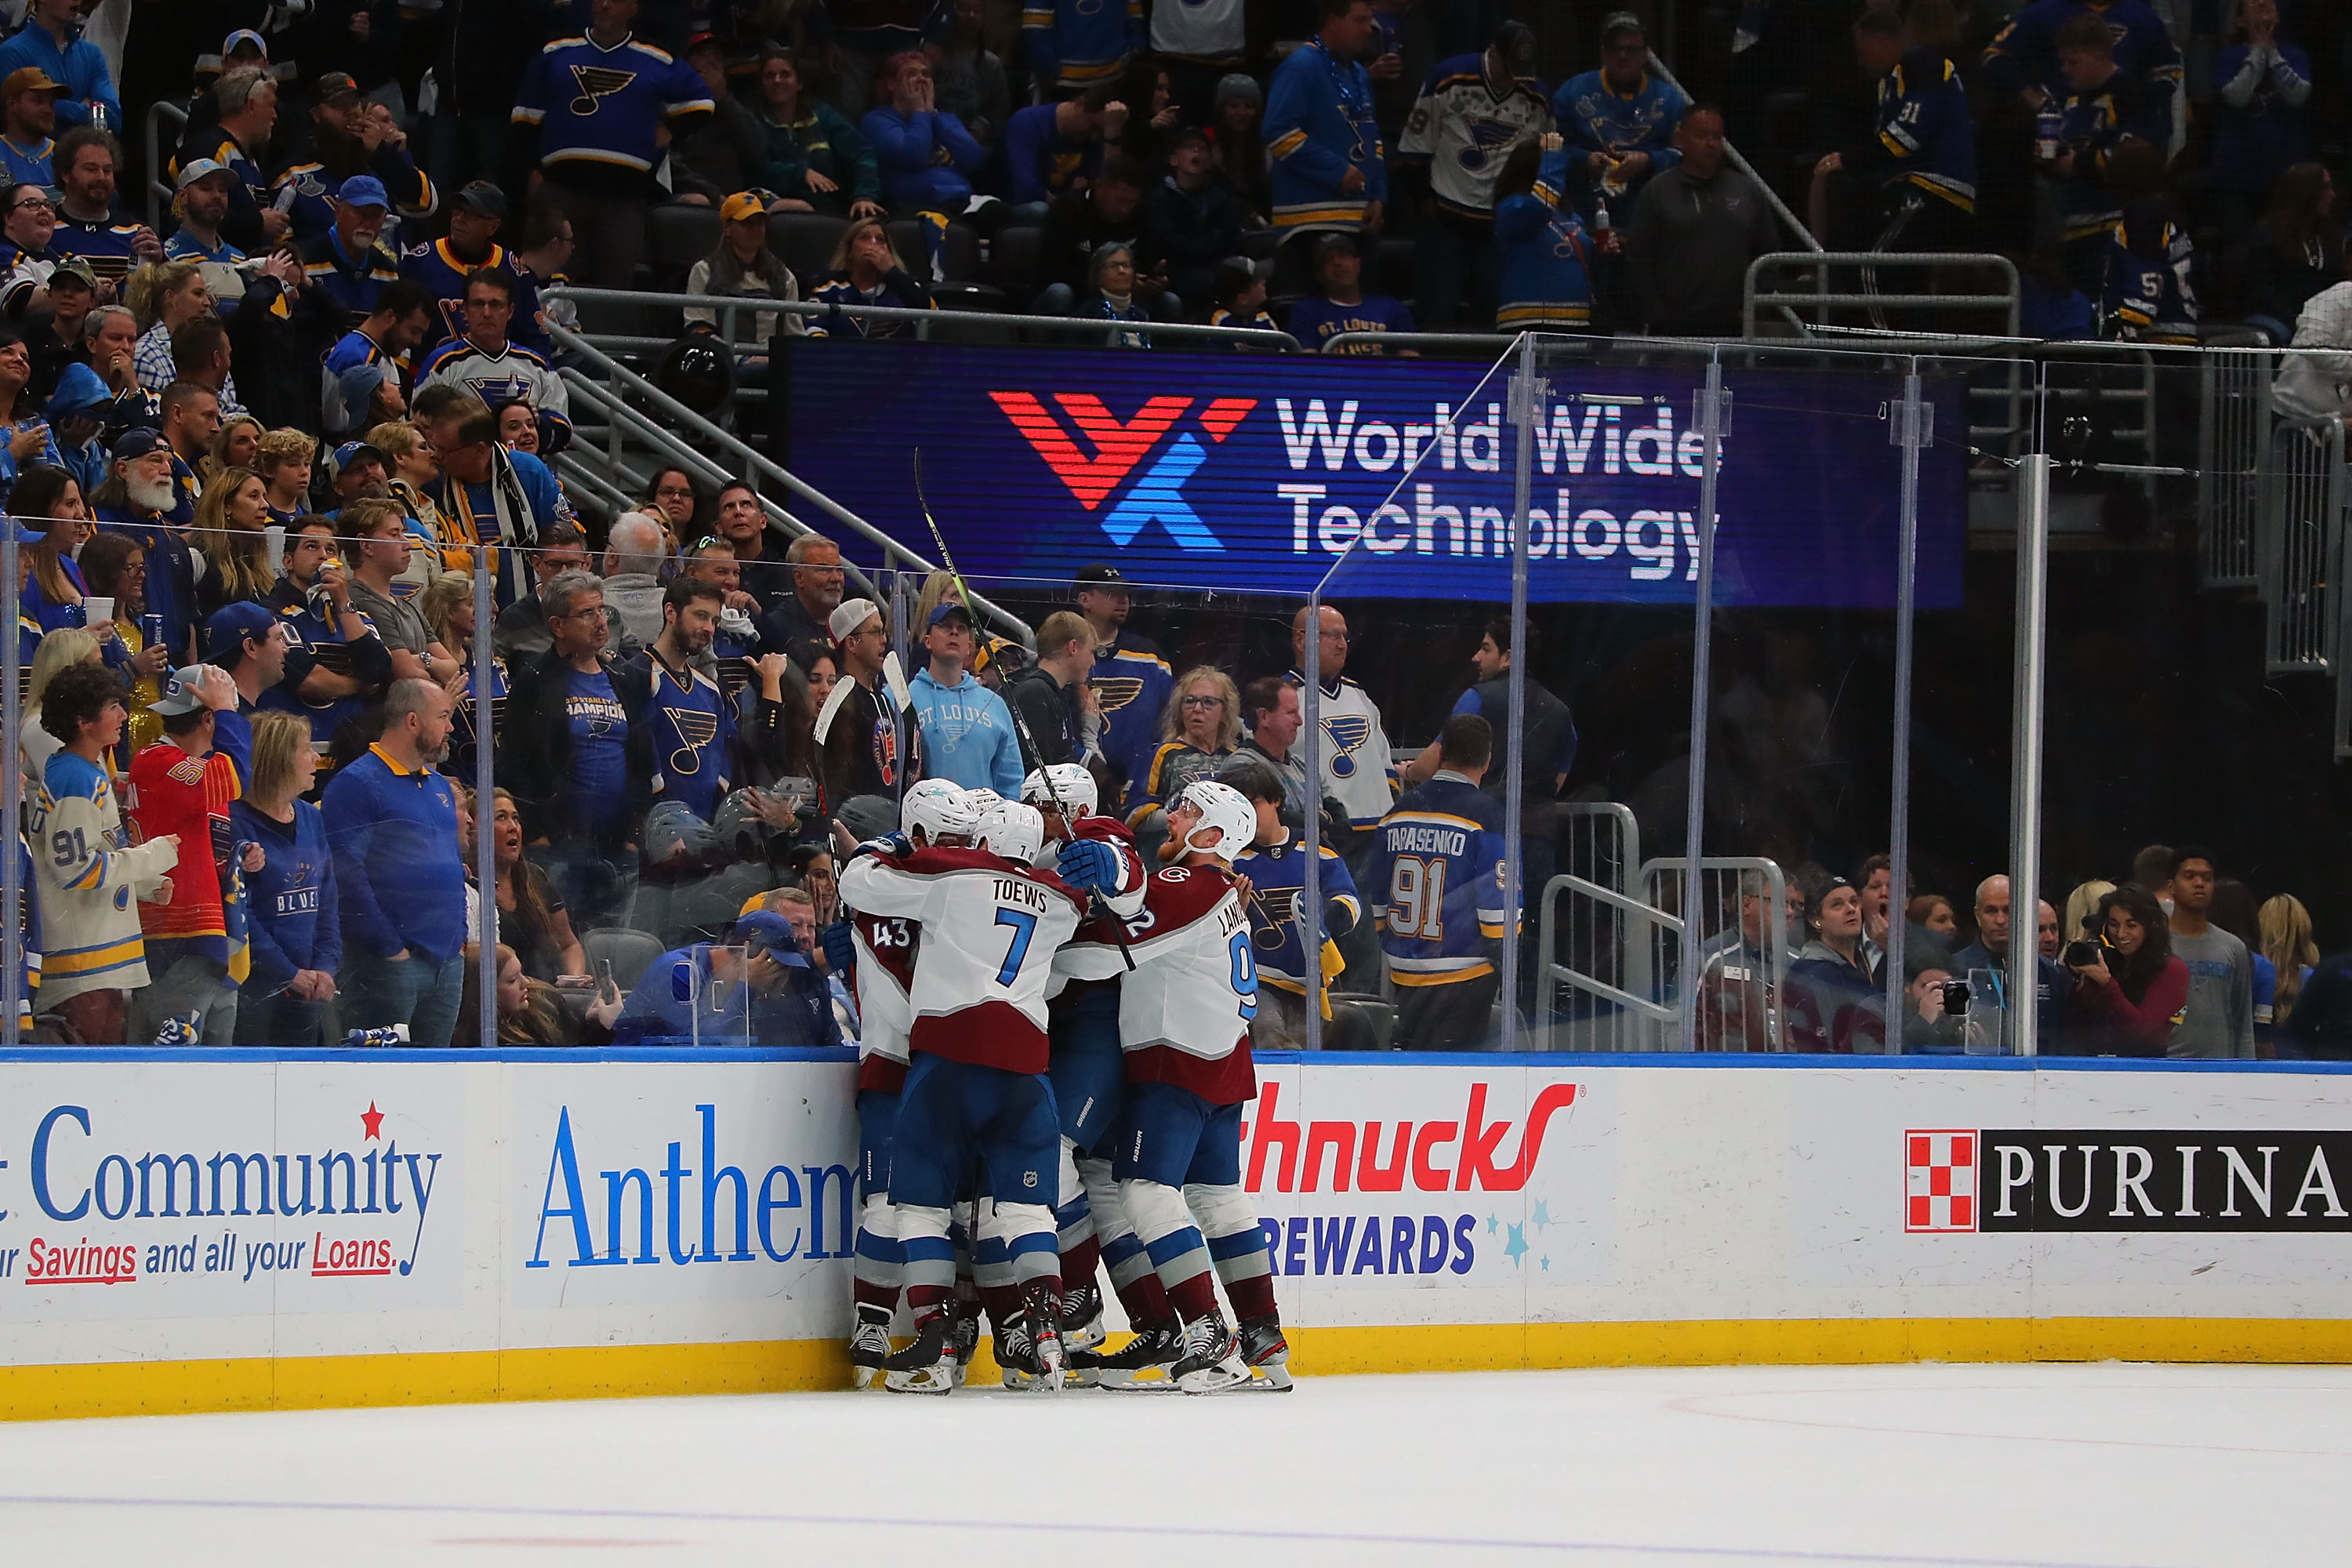 The guys hugging Helm along the boards after he scored the game winning goal!